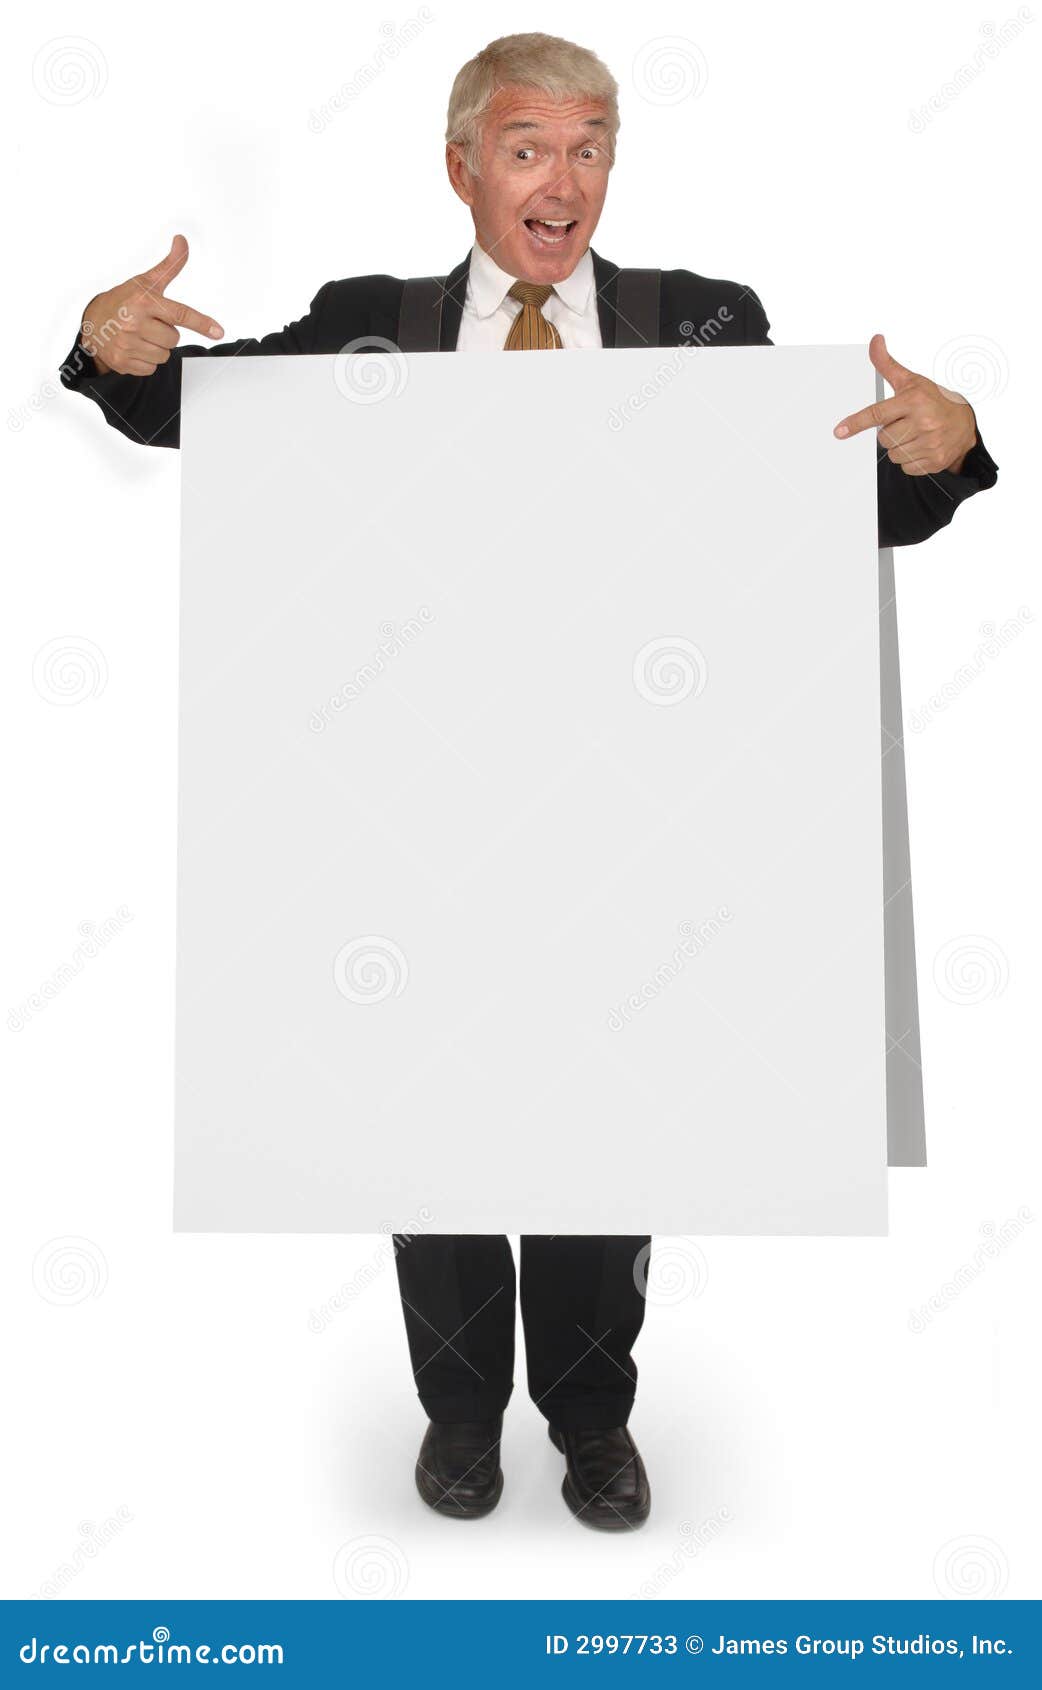 Sandwich board CEO stock image. Image of executive, poster - 2997733